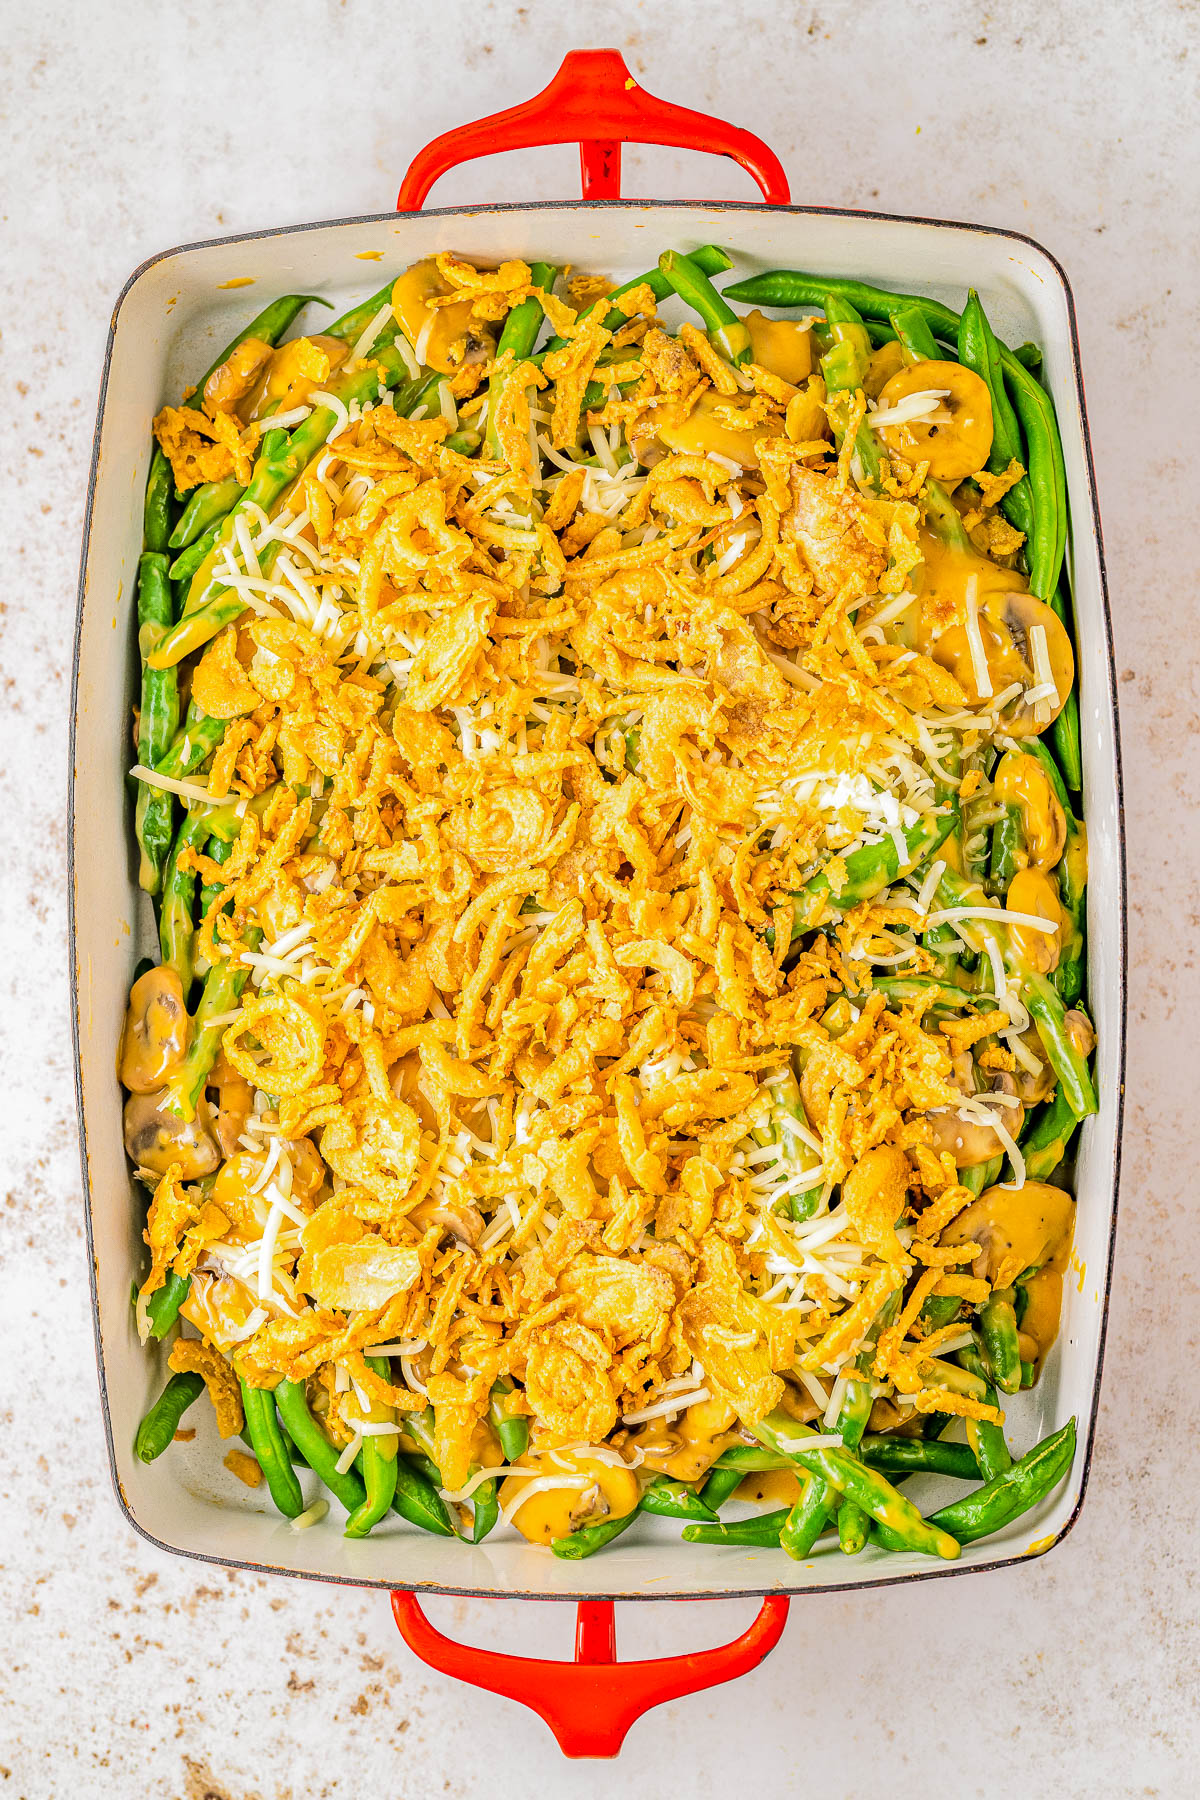 Smothered Bacon Green Bean Casserole — Homemade green bean casserole is made even better with the addition of BACON and CHEESE! Fresh green beans are smothered in a savory mushroom sauce before being topped with cheese, crumbled bacon, and fried onions. A truly decadent, cheesy casserole that’s perfect for Thanksgiving, Christmas, or when you're craving a comfort food side dish - and no canned or condensed soups in sight!